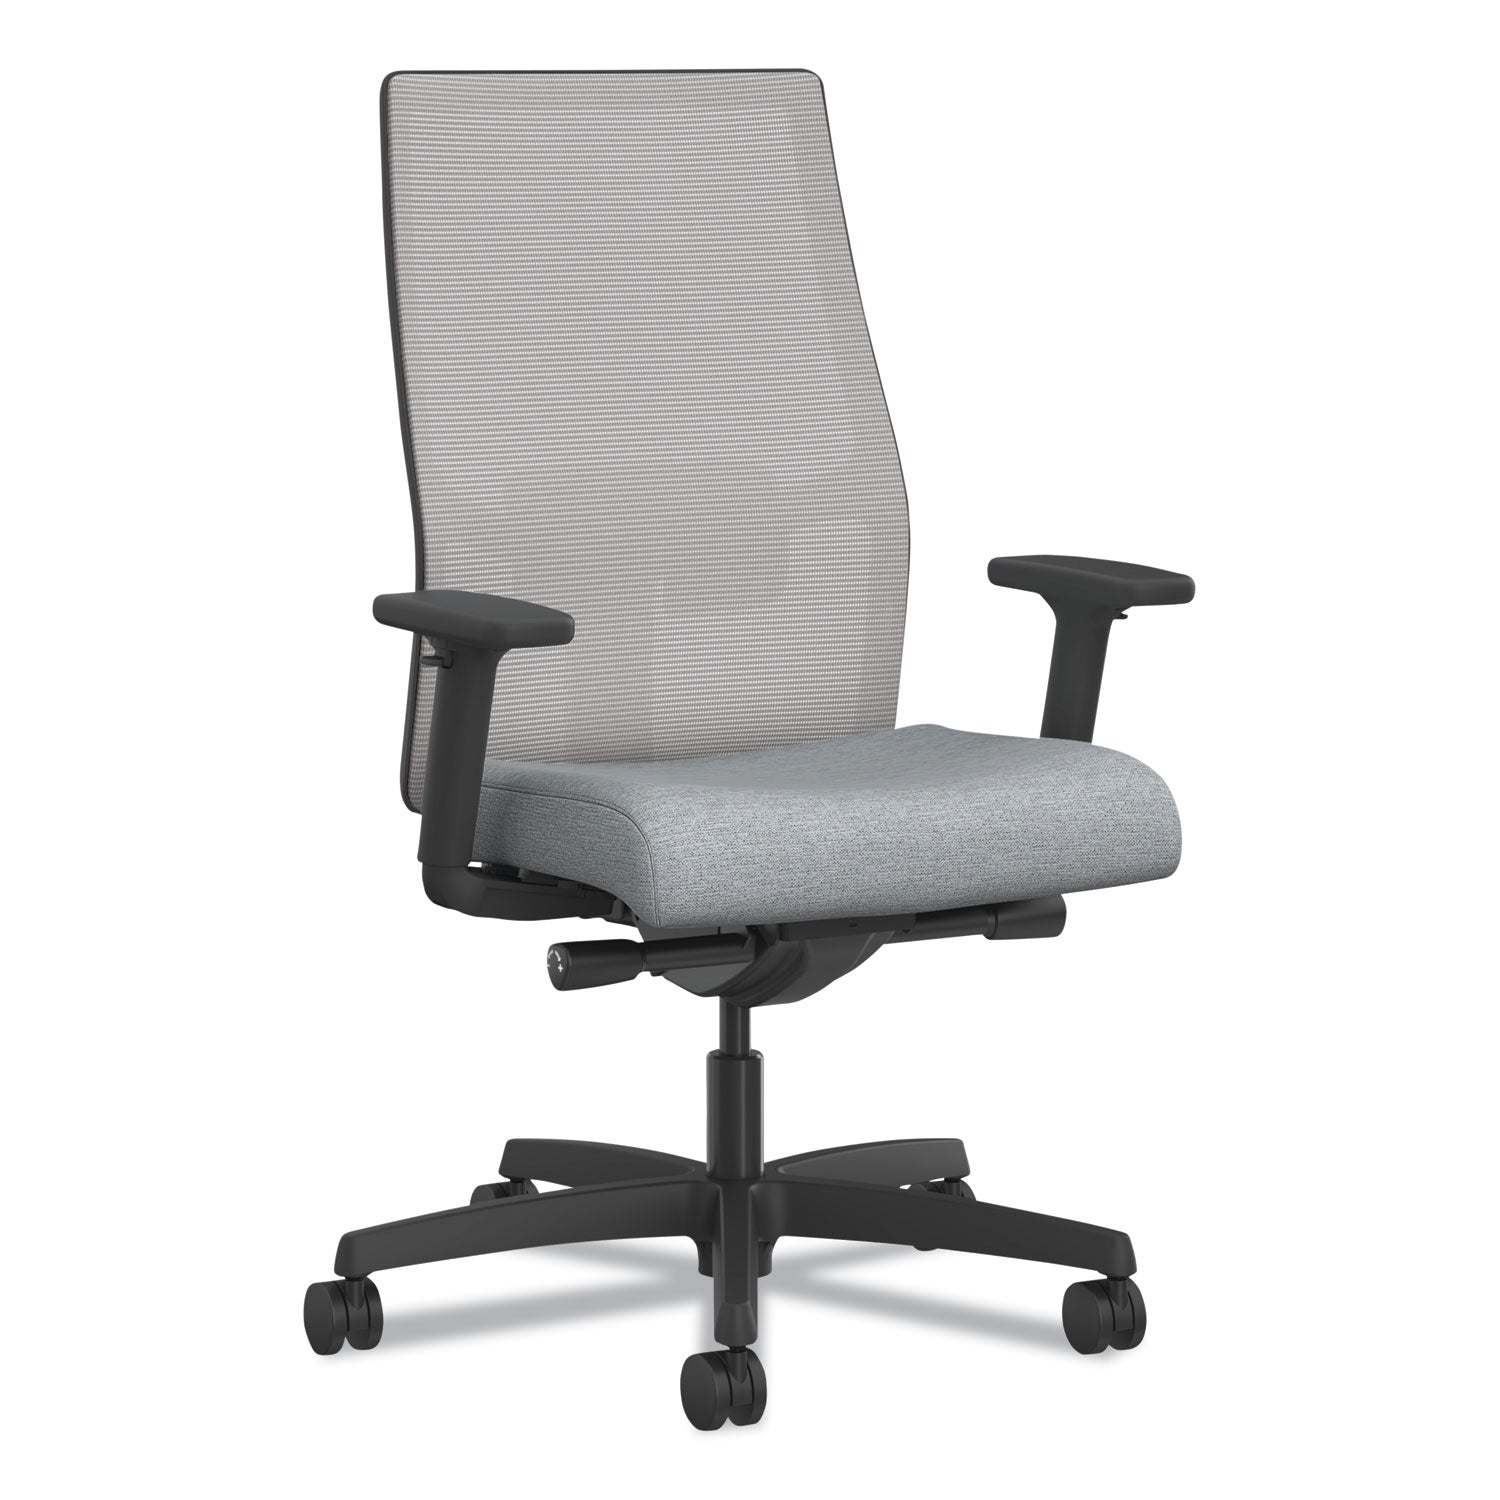 ignition-20-4-way-stretch-mid-back-mesh-task-chair-white-adjustable-lumbar-support-cloud-fog-white-ships-in-7-10-bus-days_honi2mm2afh18bt - 1